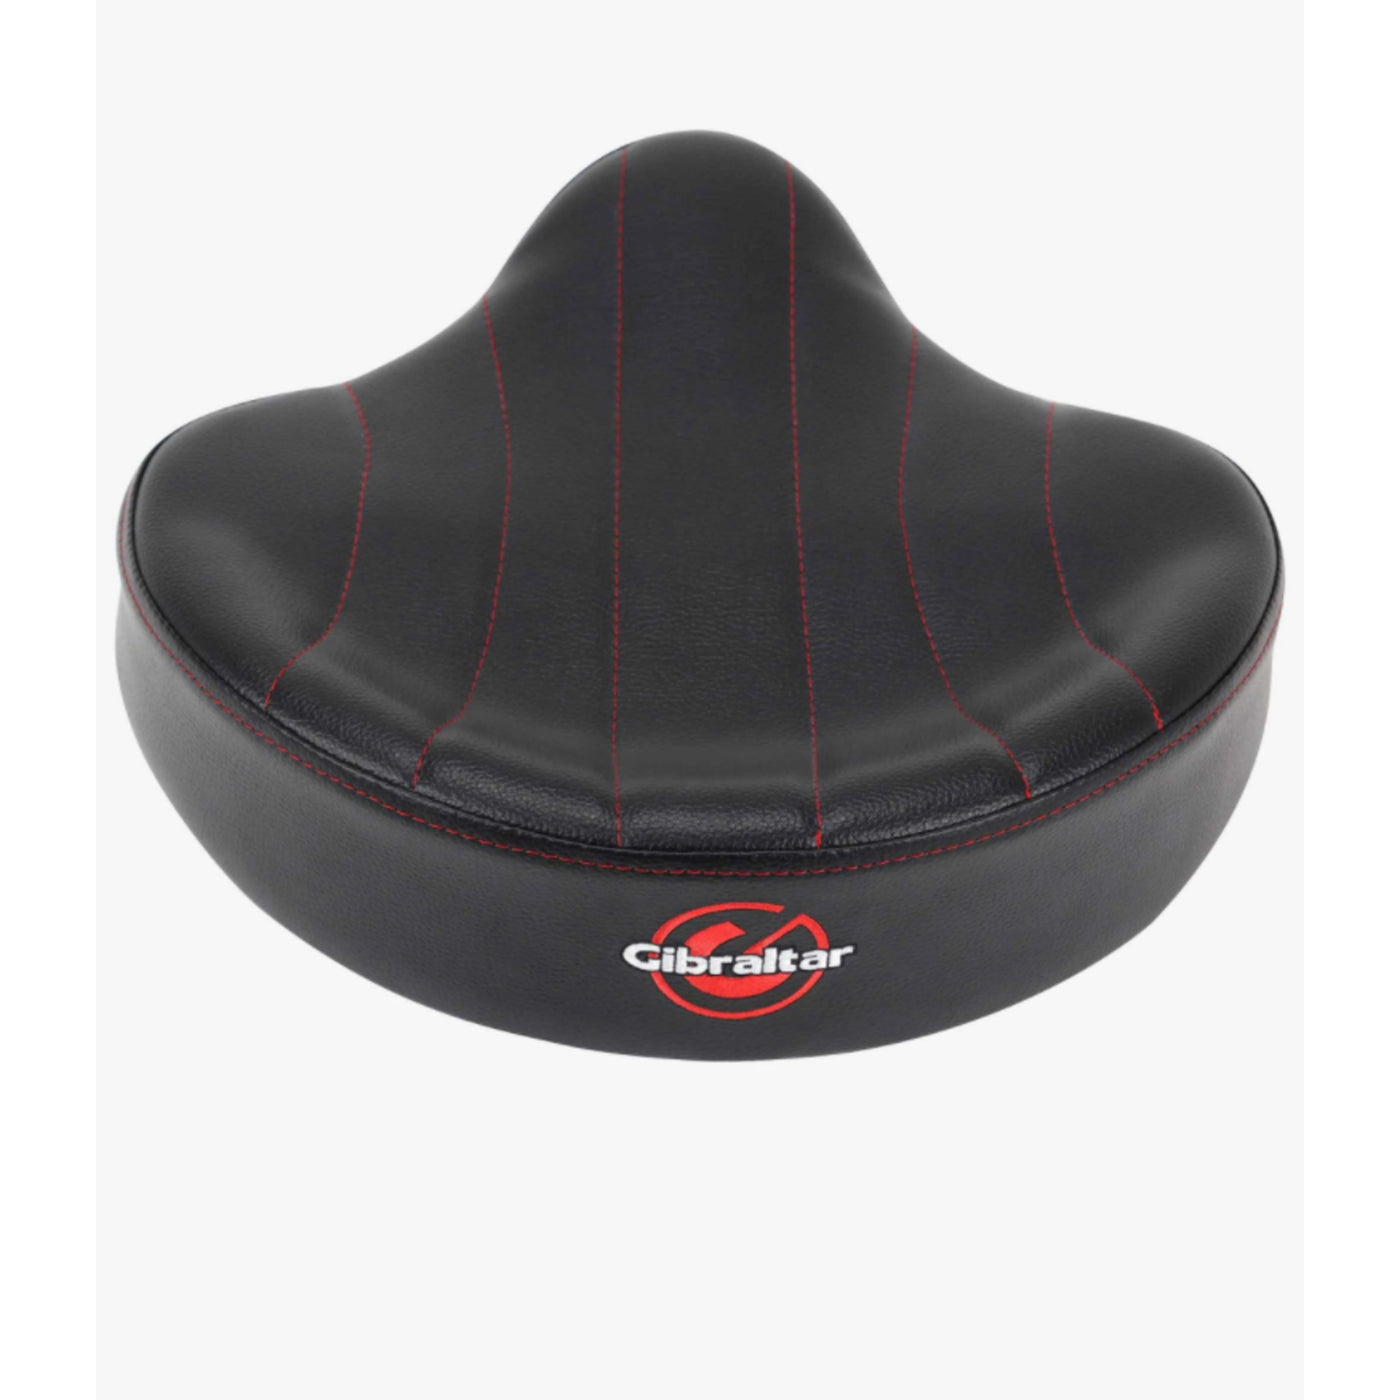 Gibraltar 9000 Series 17-Inch Oversized Motorcycle Saddle Drum Throne (9908)